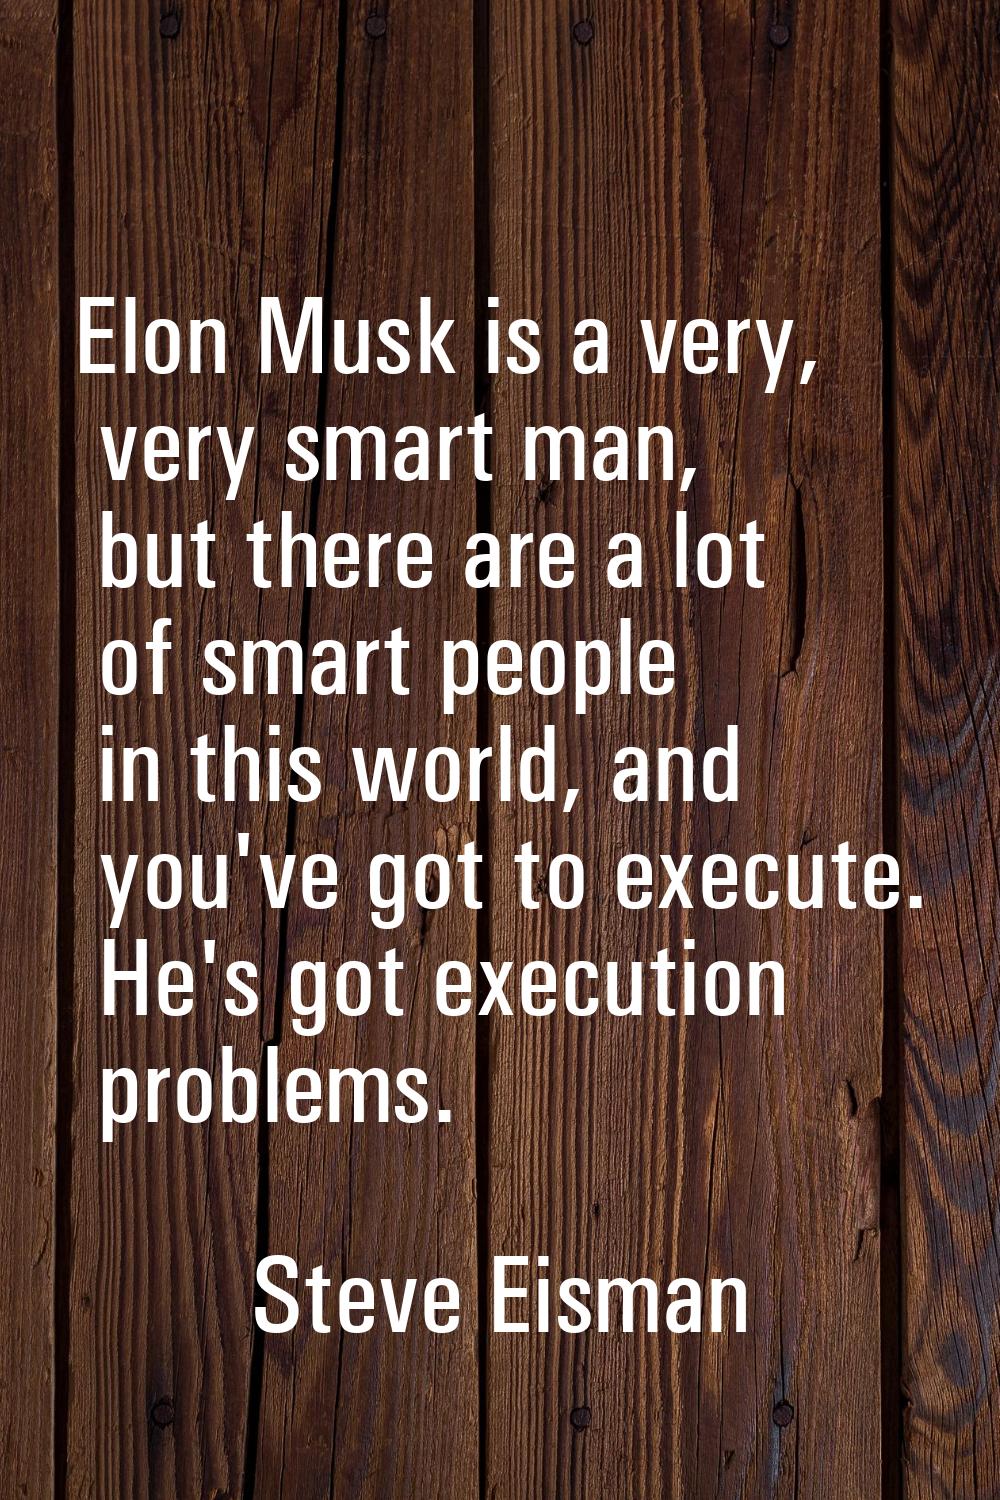 Elon Musk is a very, very smart man, but there are a lot of smart people in this world, and you've 